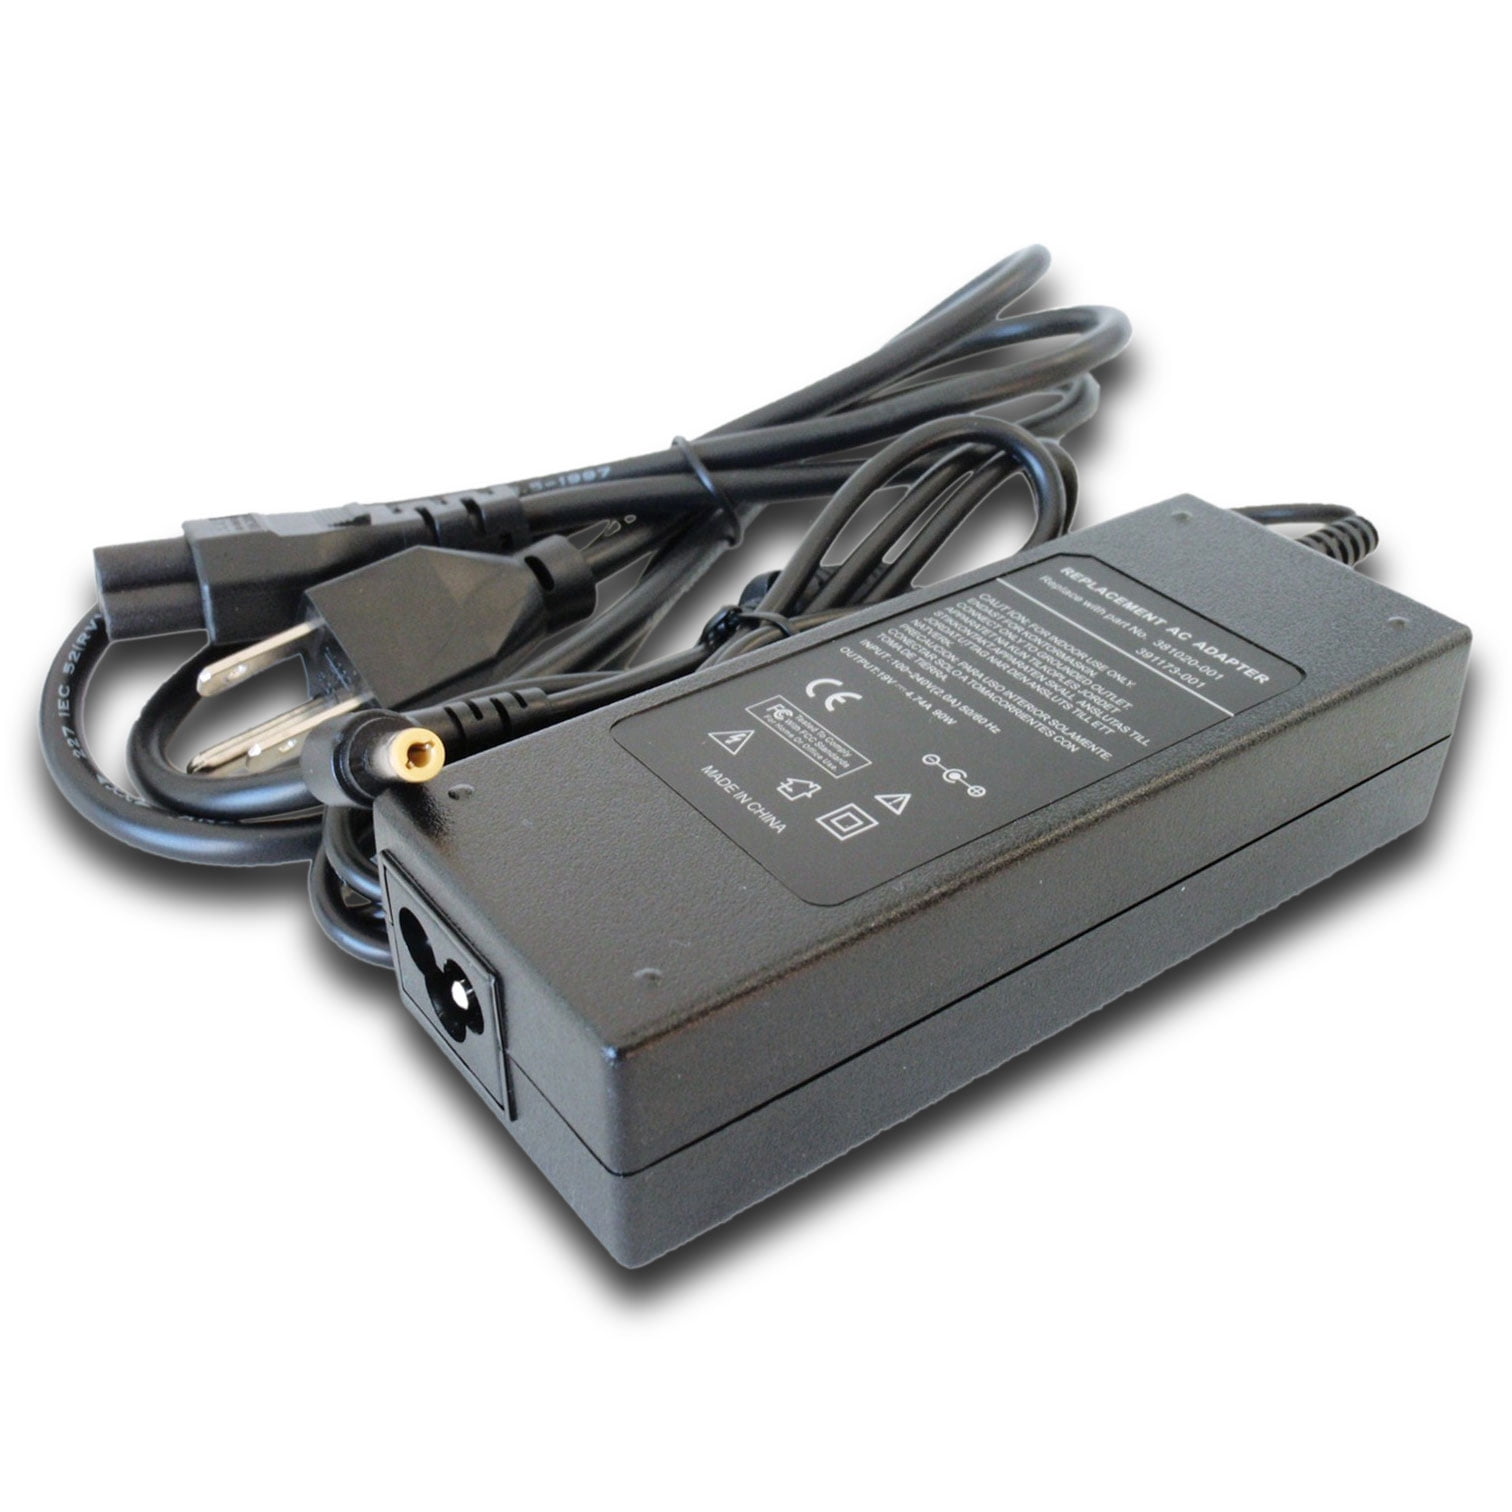 75W-HP21 Laptop Power Supply Cord Charger 19V AC Adapter For REPLACEMENT Model 